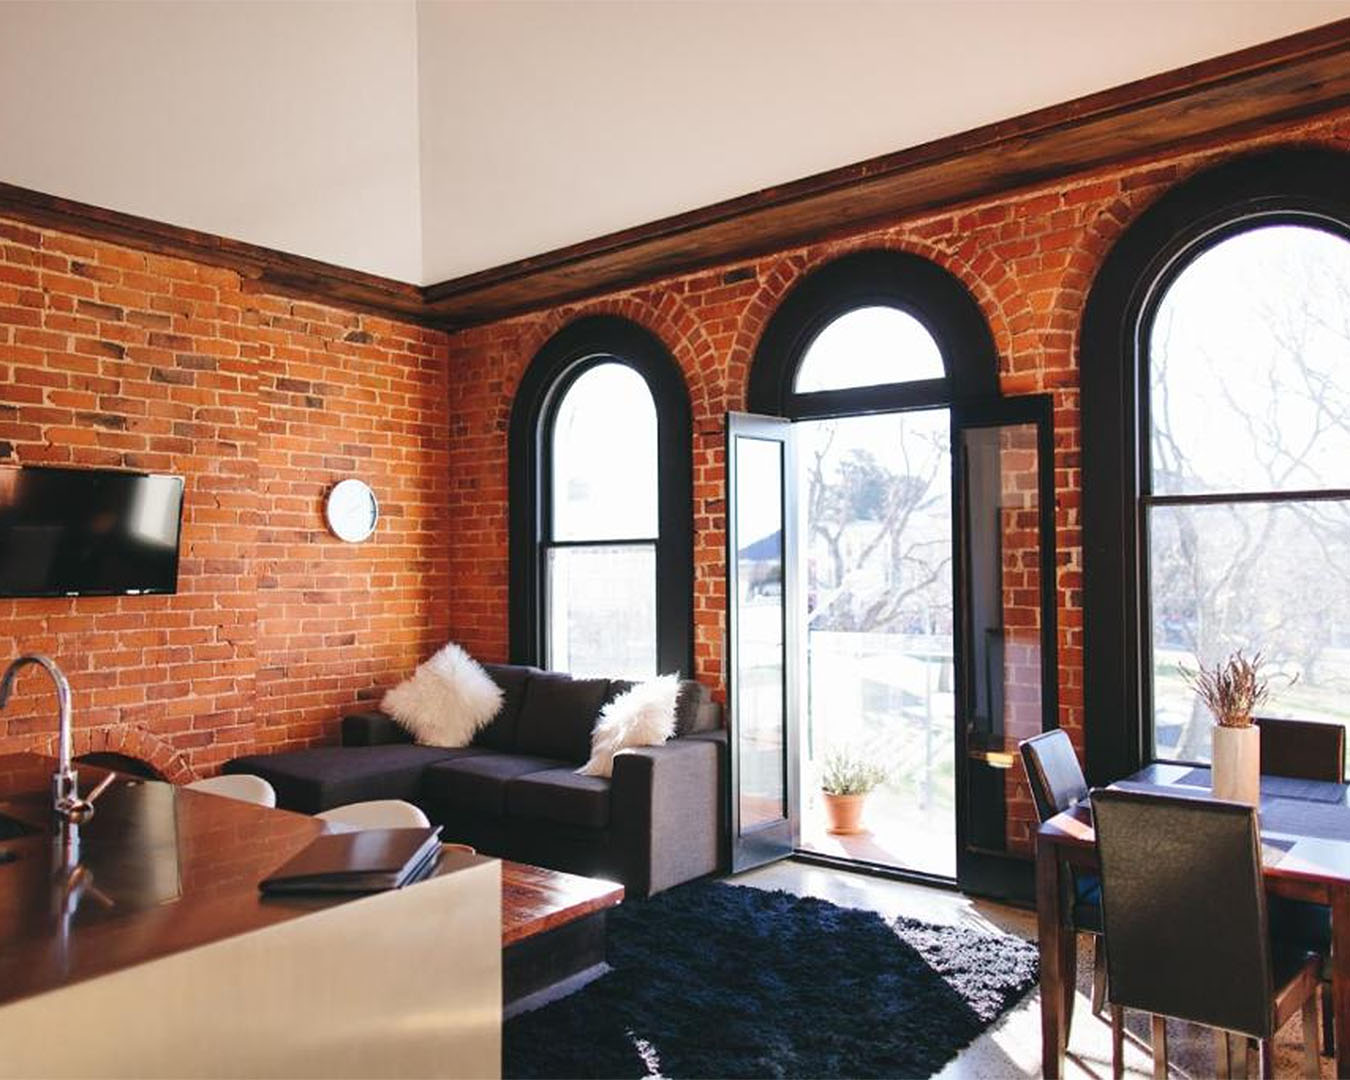 Wooden-accents and brick walls with vintage windows at Terminus Apartments in Dunedin.